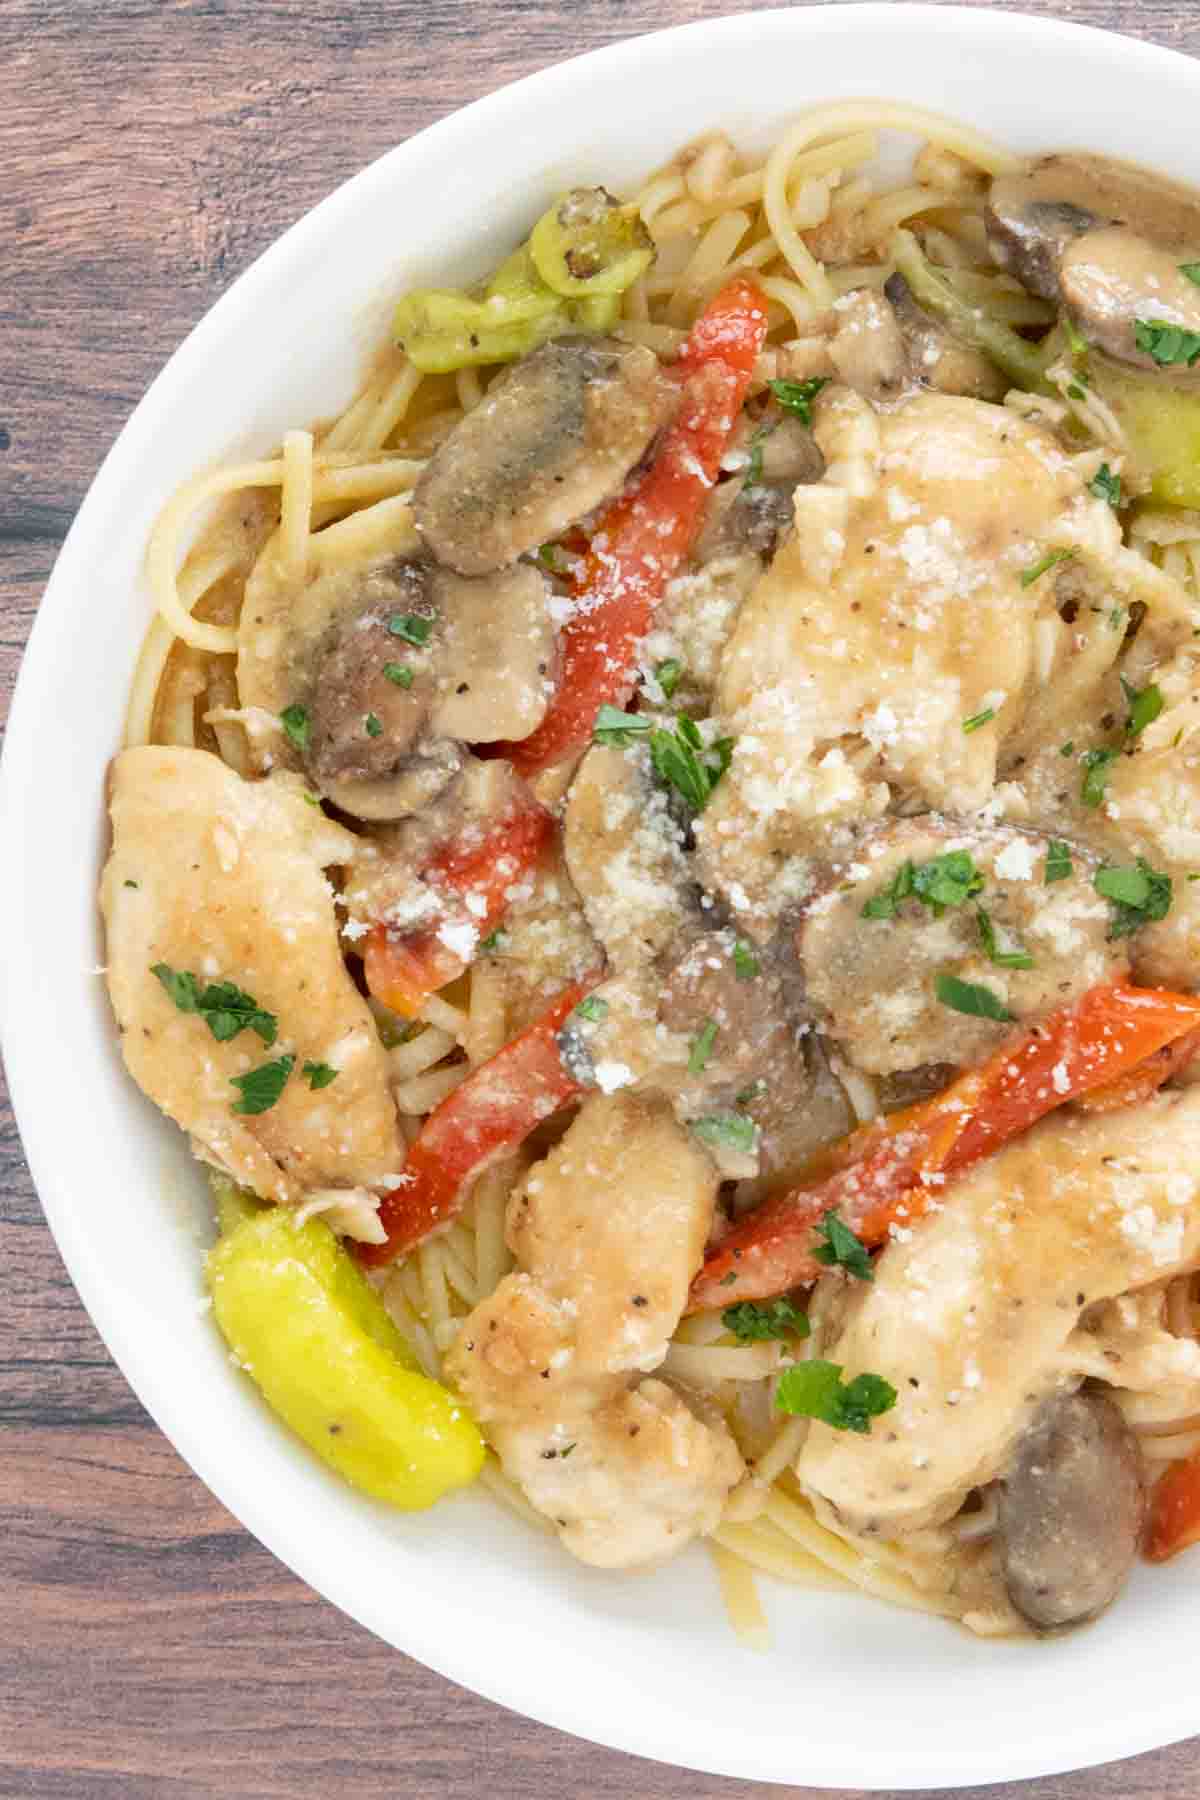 Chicken tuscano with pasta in white bowl.